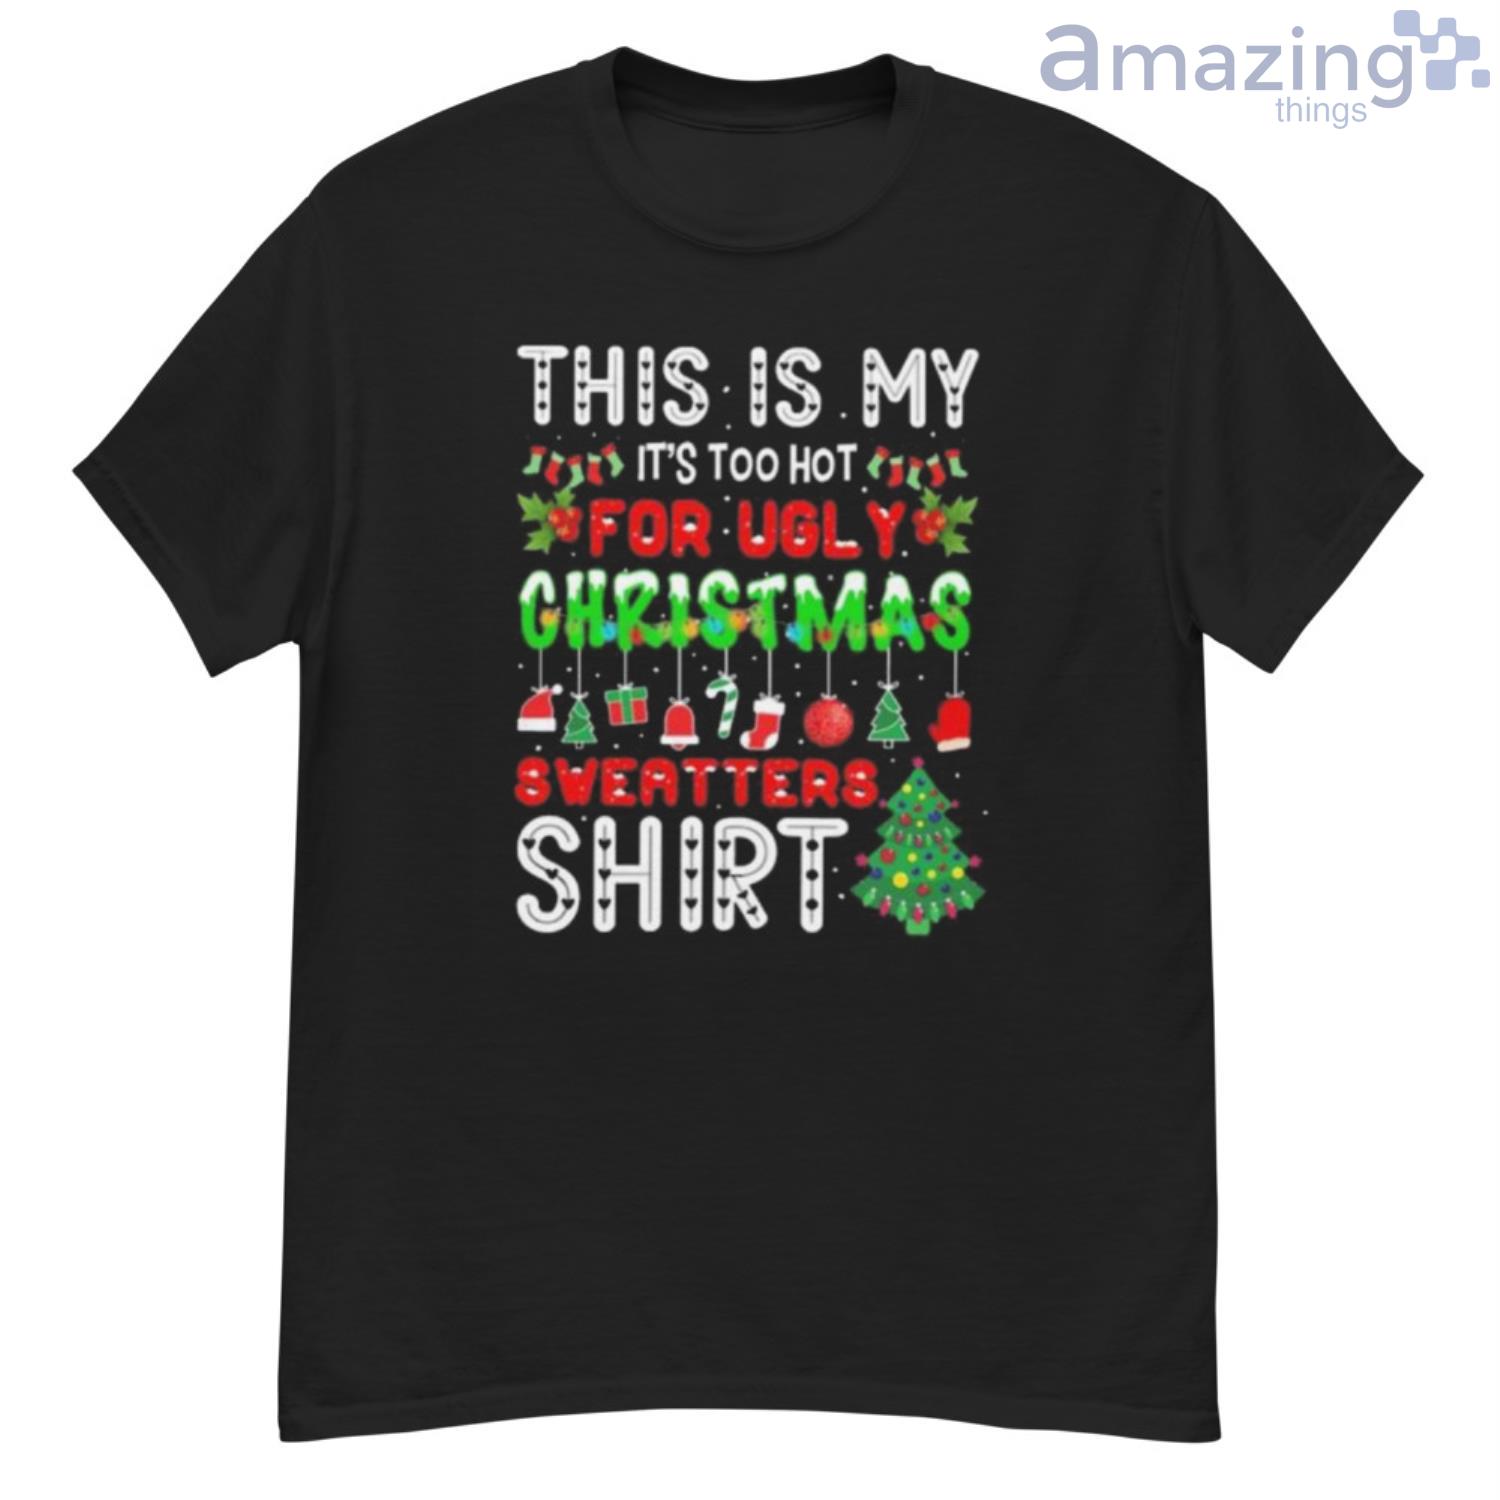 Thi is my it’s too hot for ugly christmas sweater shirt - G500 Men’s Classic T-Shirt